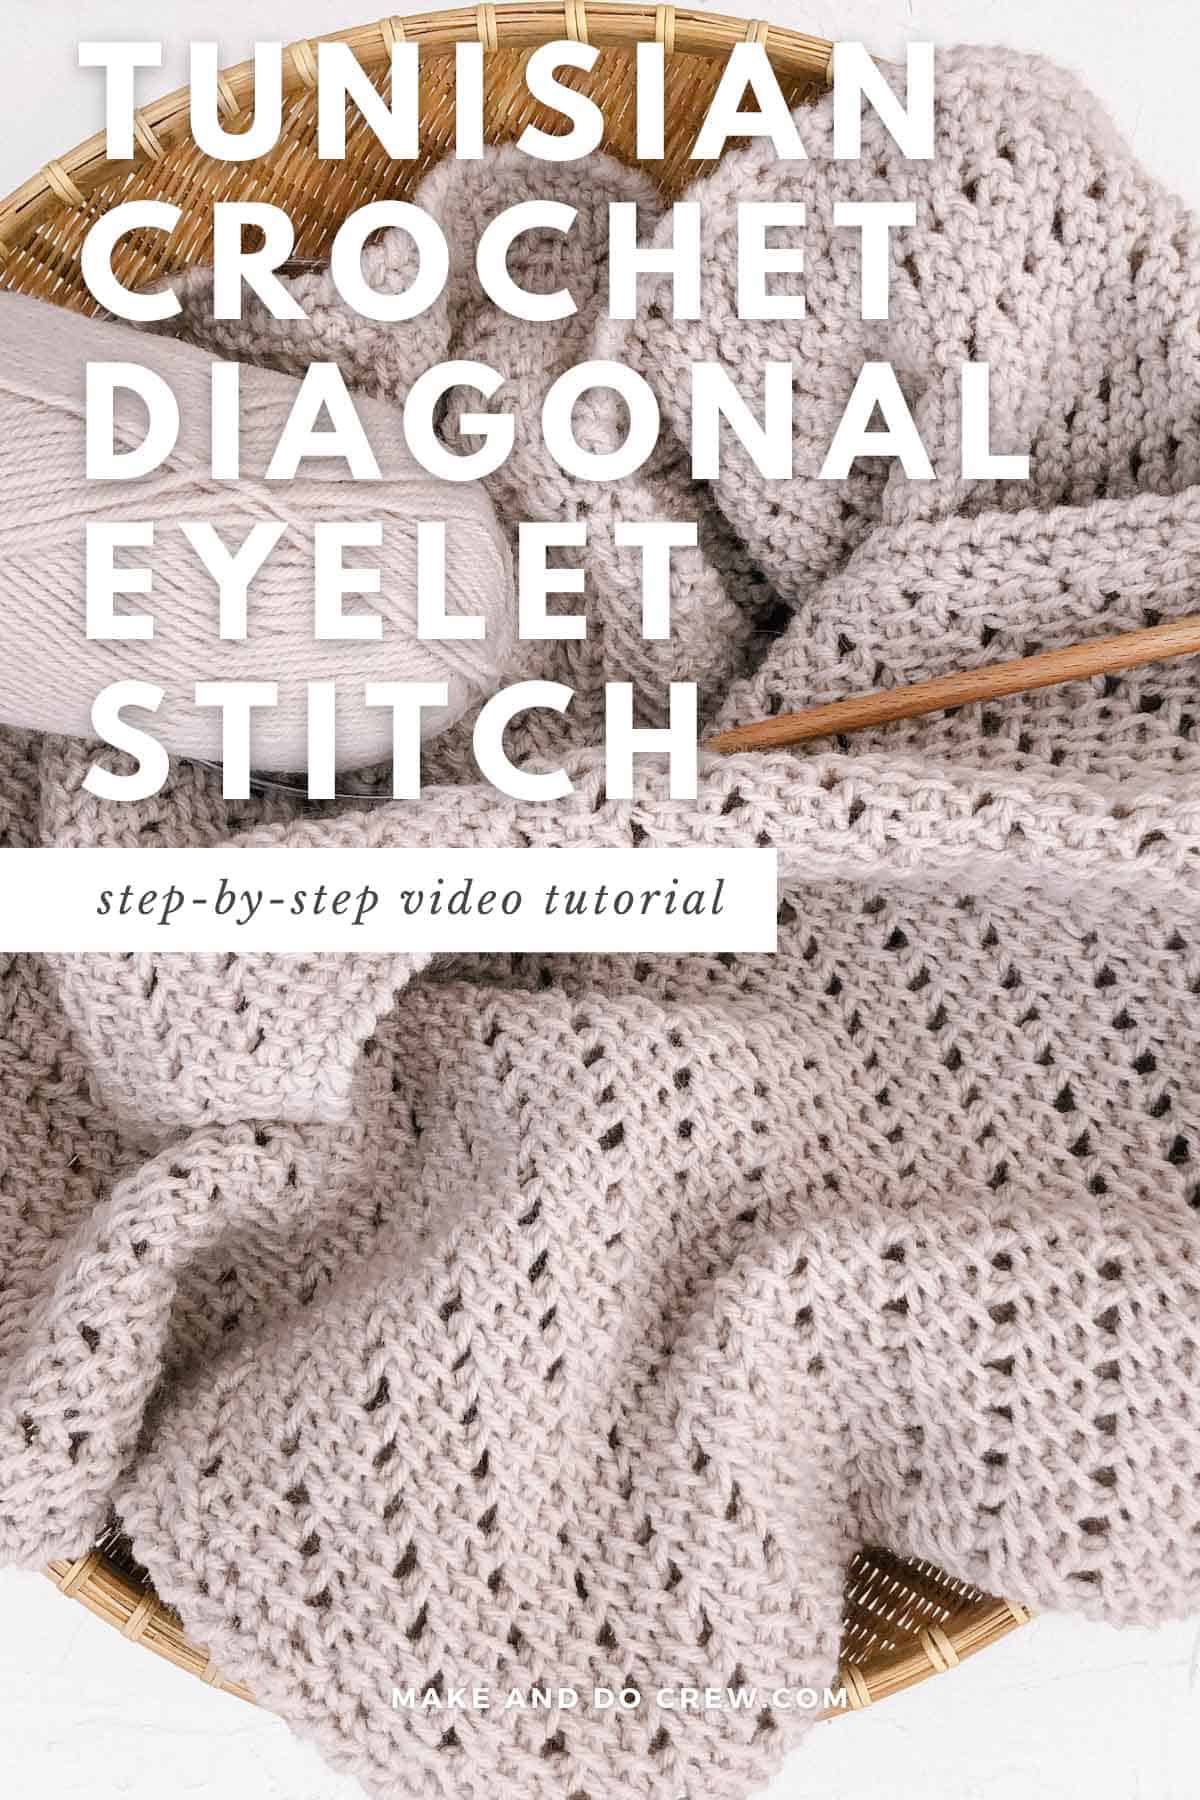 This beautiful Tunisian crochet stitch includes simple, modern eyelets that create a drapy and flowy fabric.